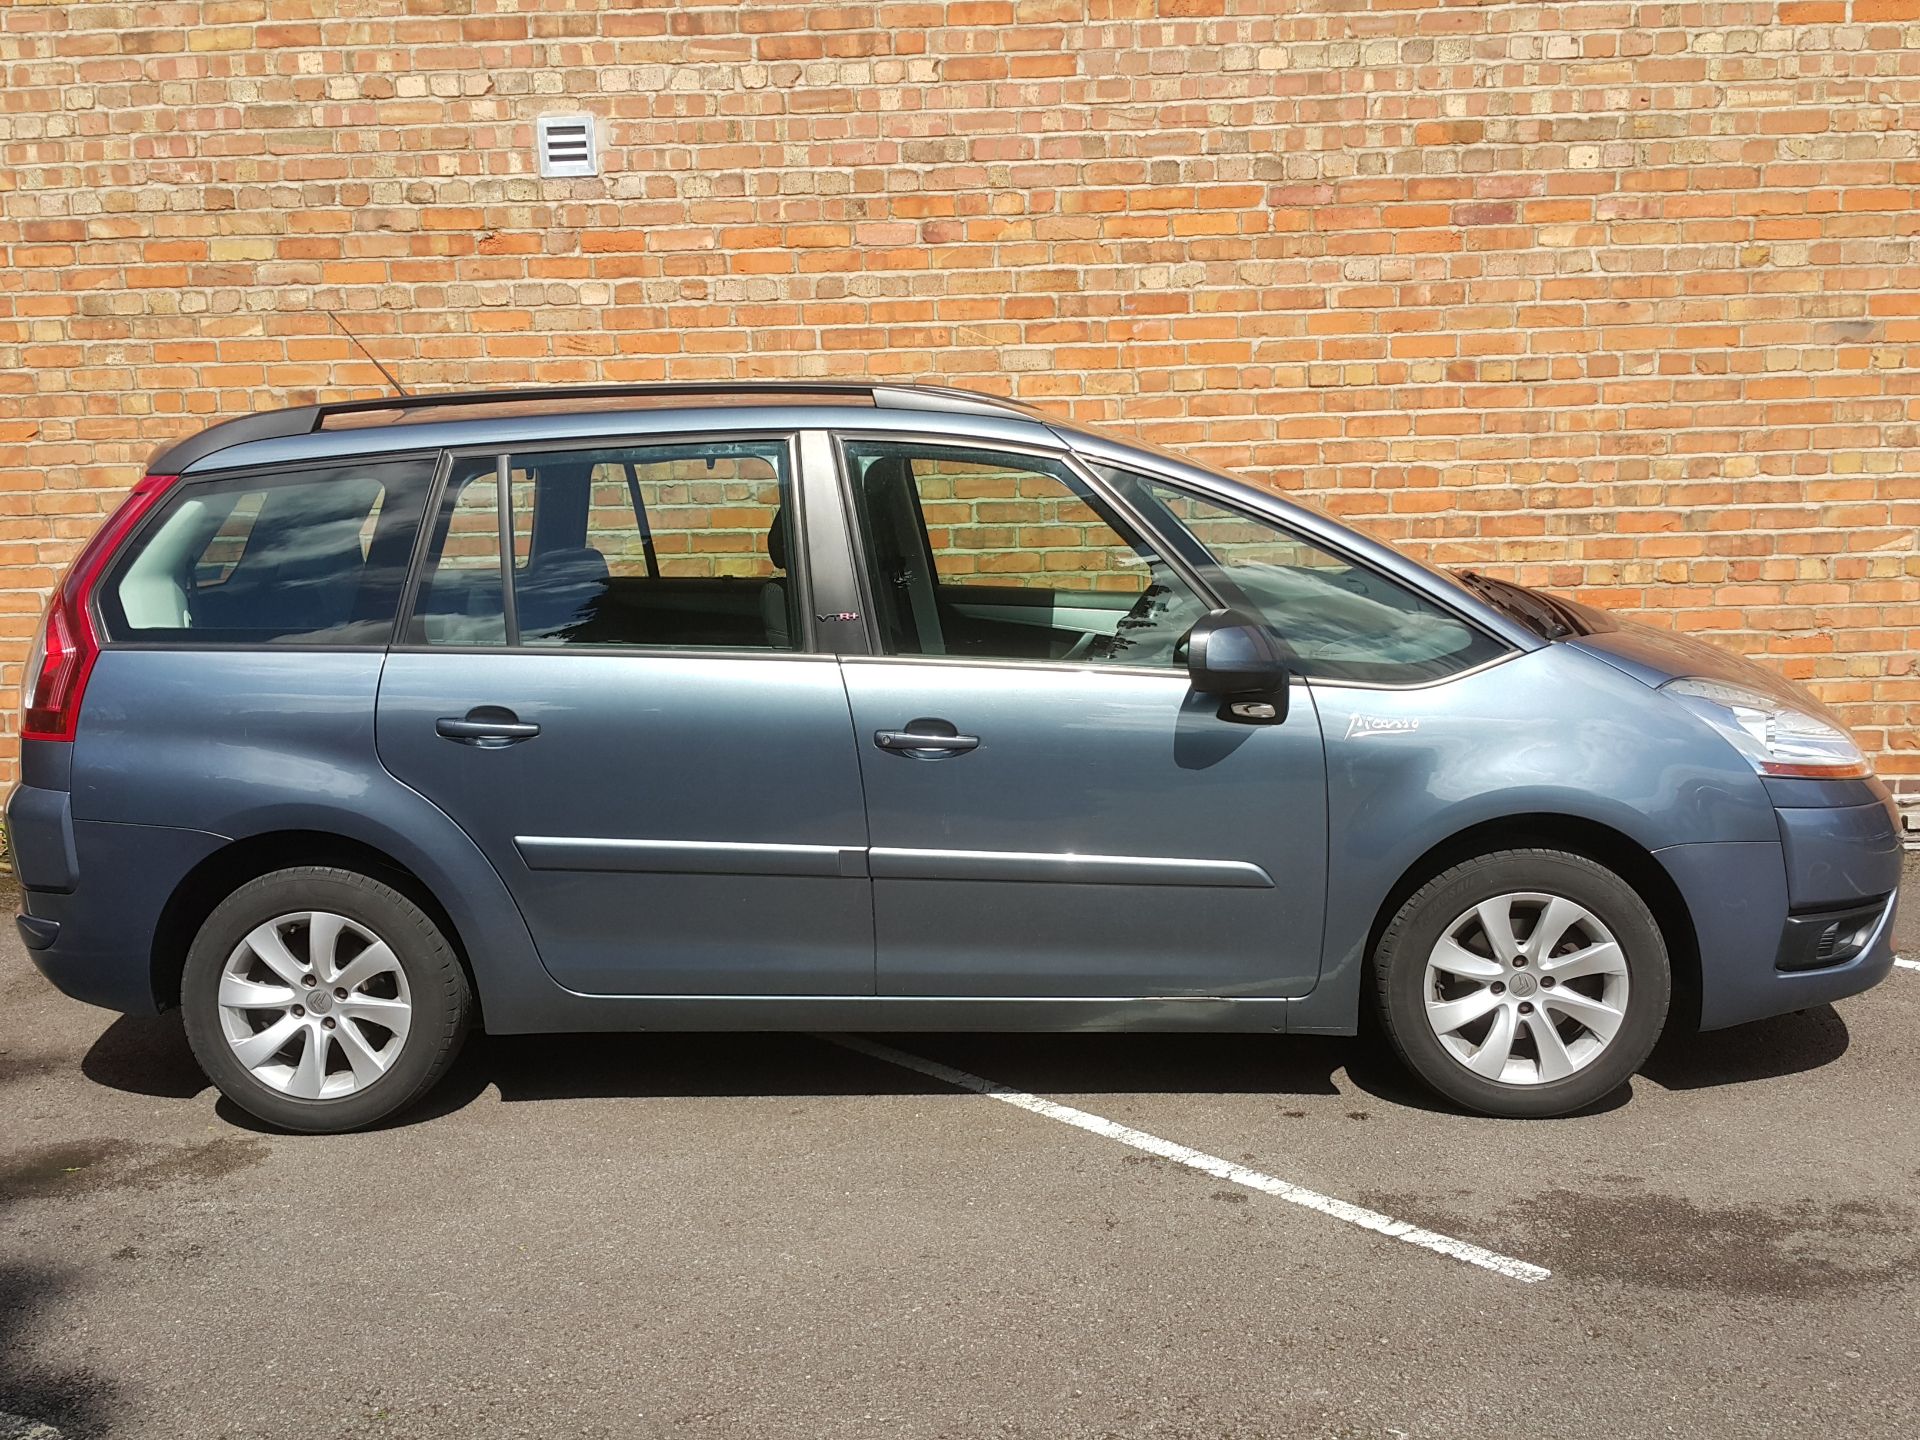 CITROEN C4 GRAND PICASSO VTR+ 7 SEATER - Image 5 of 19